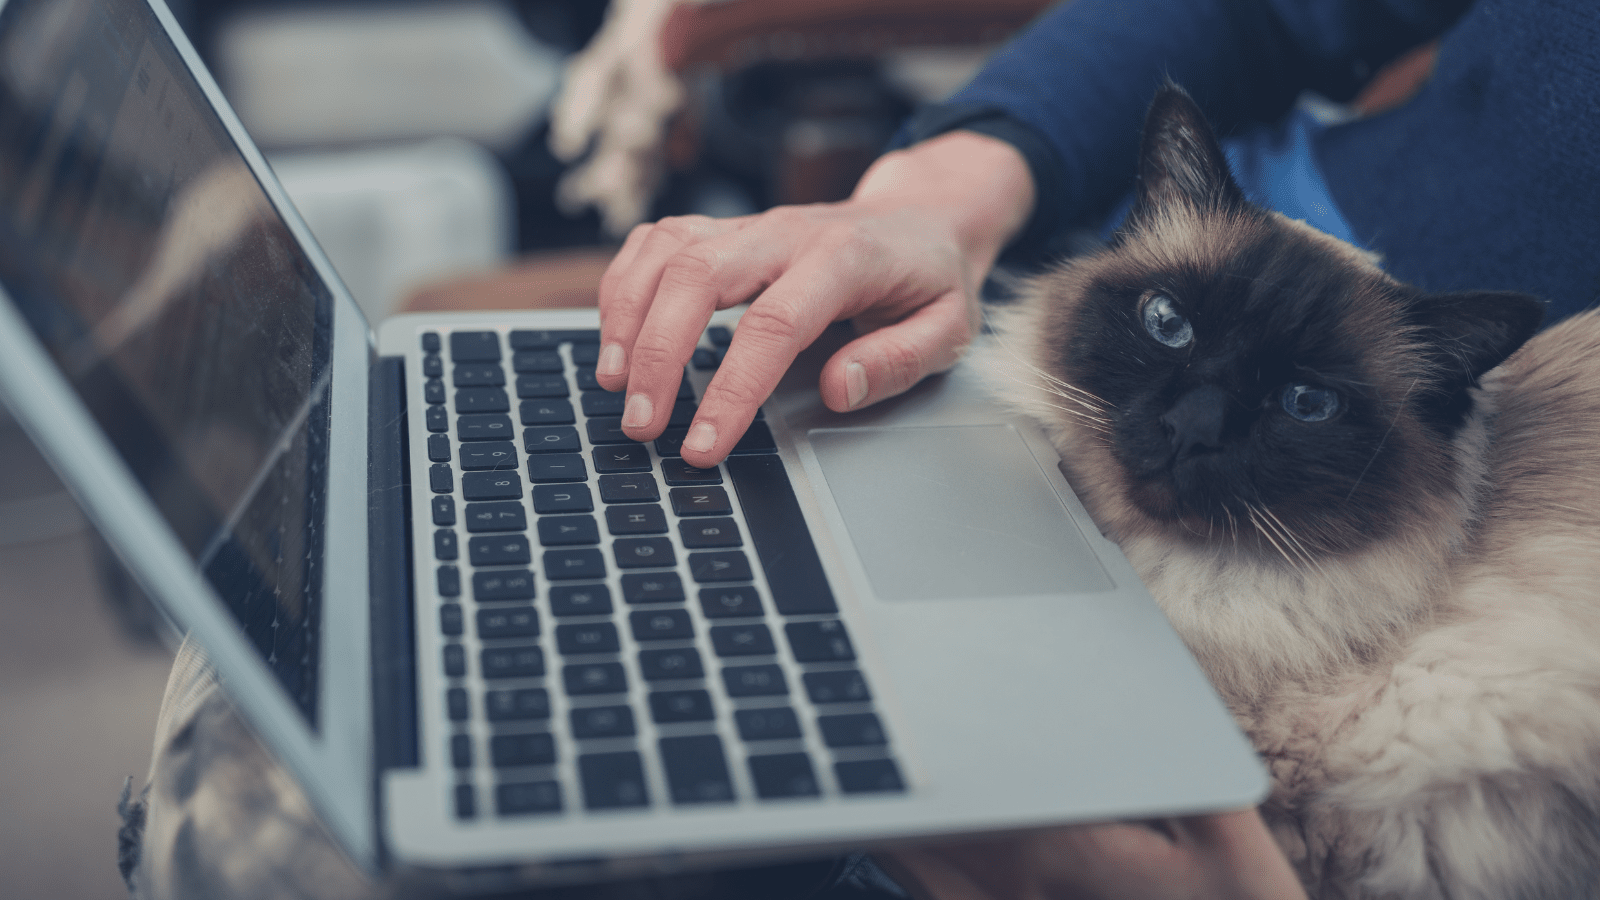 A person works on a laptop while their Siamese mix cat sits in their lap